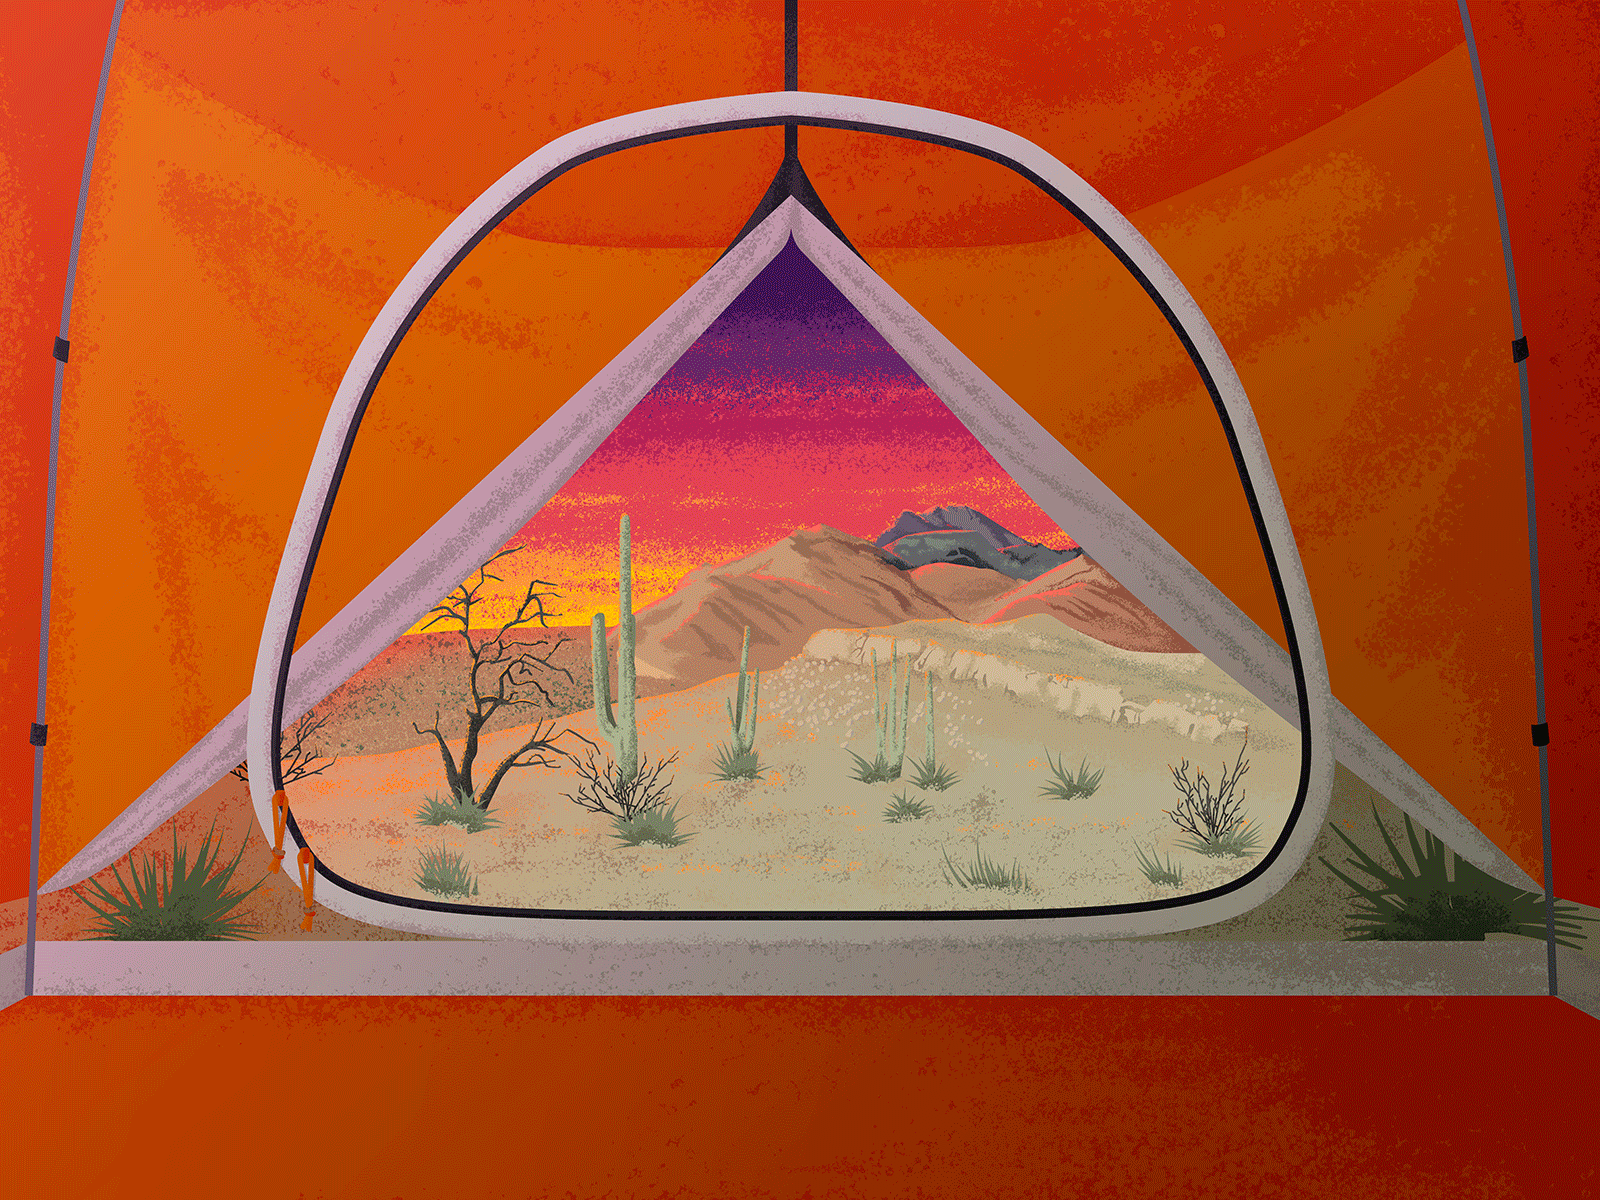 anywhere but home cabin fever camping desert drawings illustration outdoors photoshop river snow texture ufos